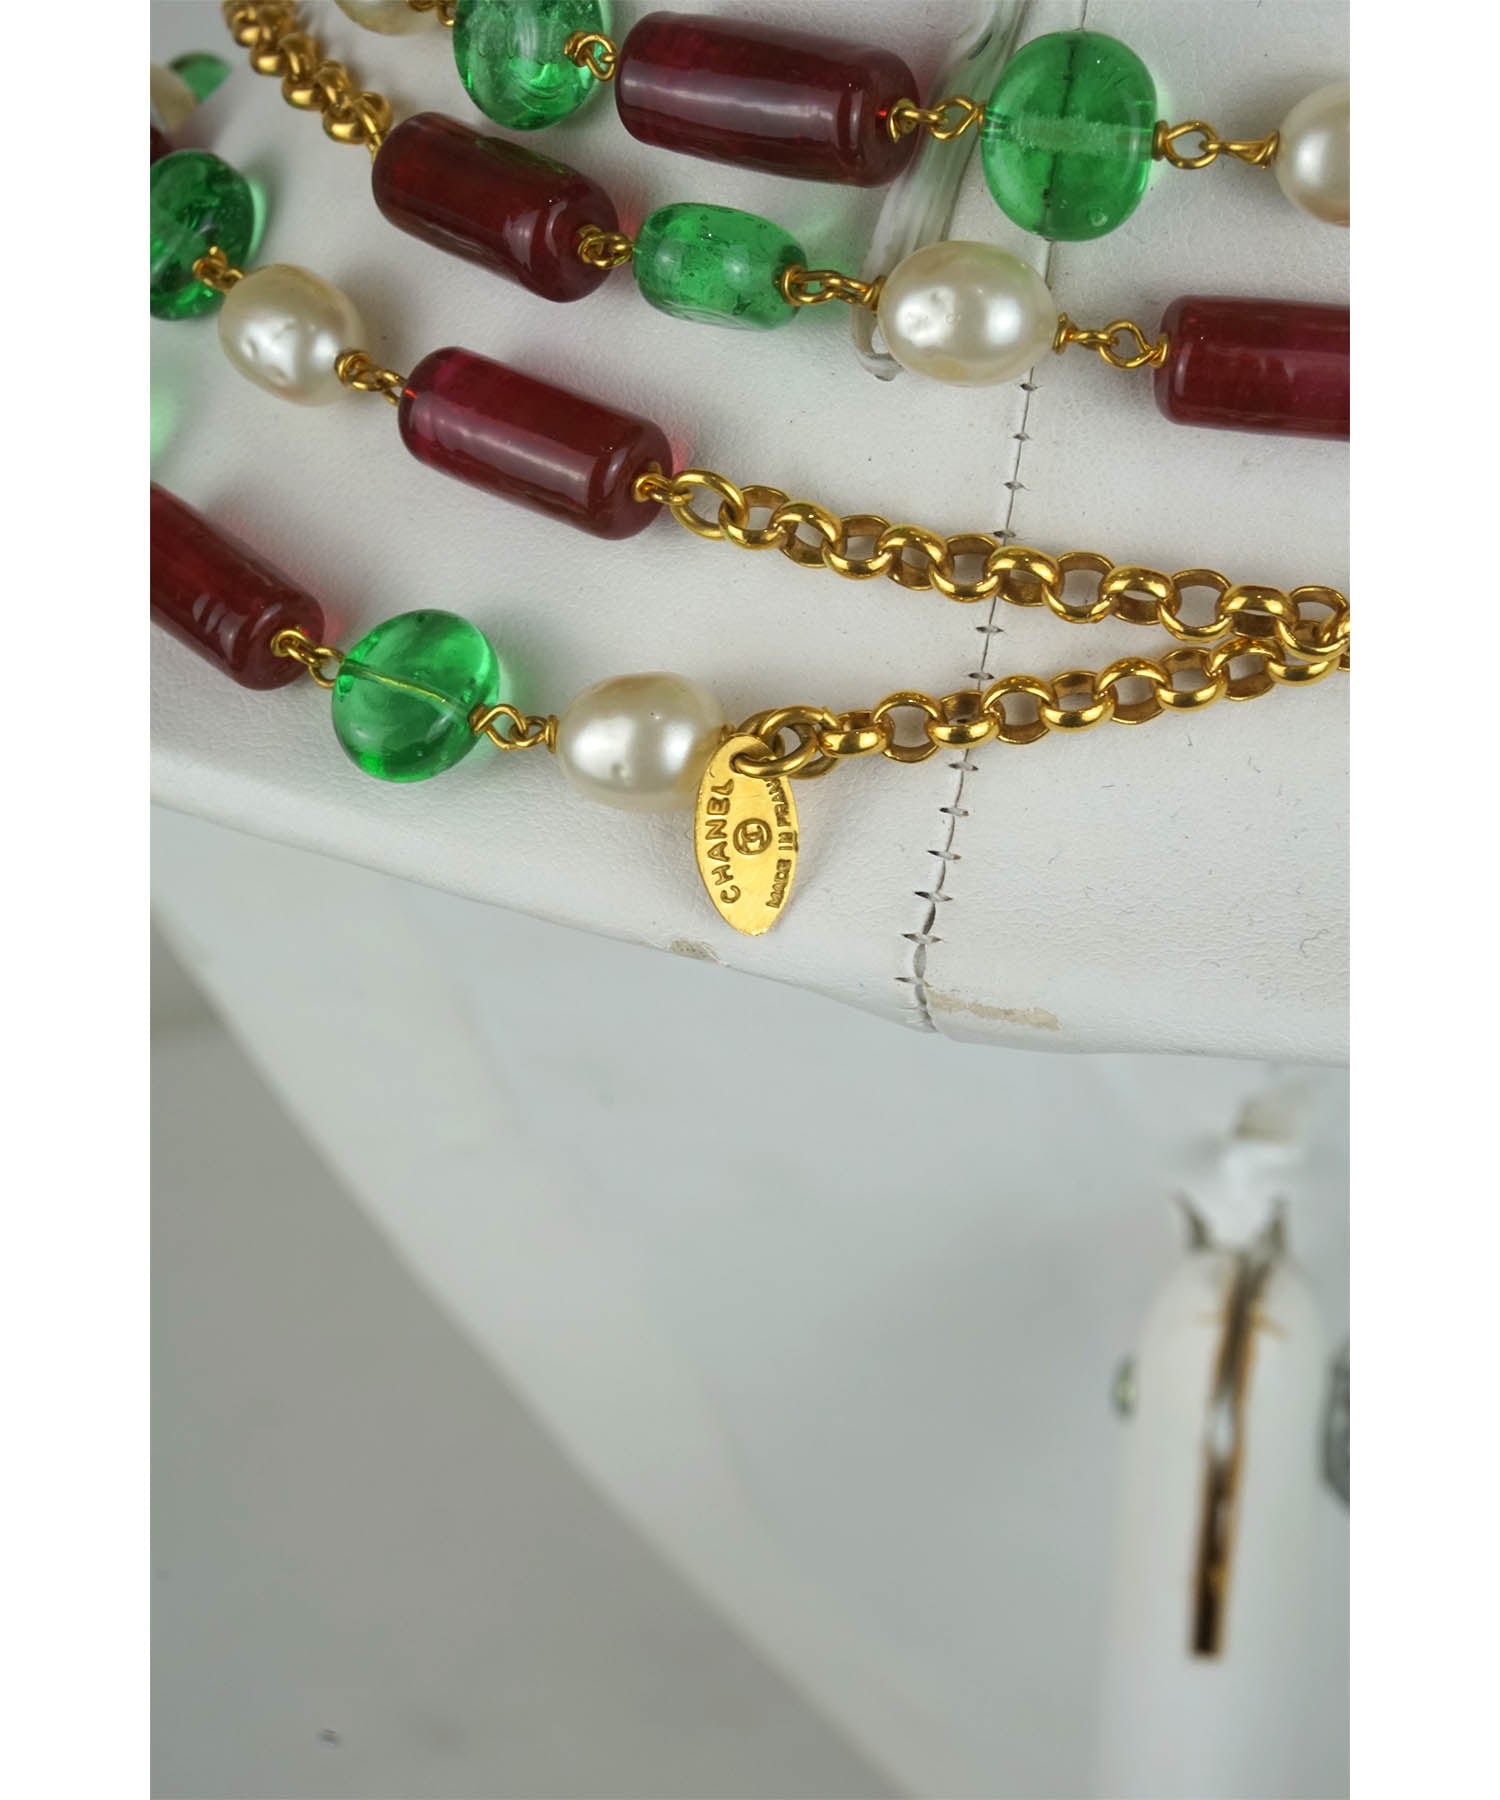 Chanel 1984 Green and Red Gripoix with Pearl Sautoir Necklace